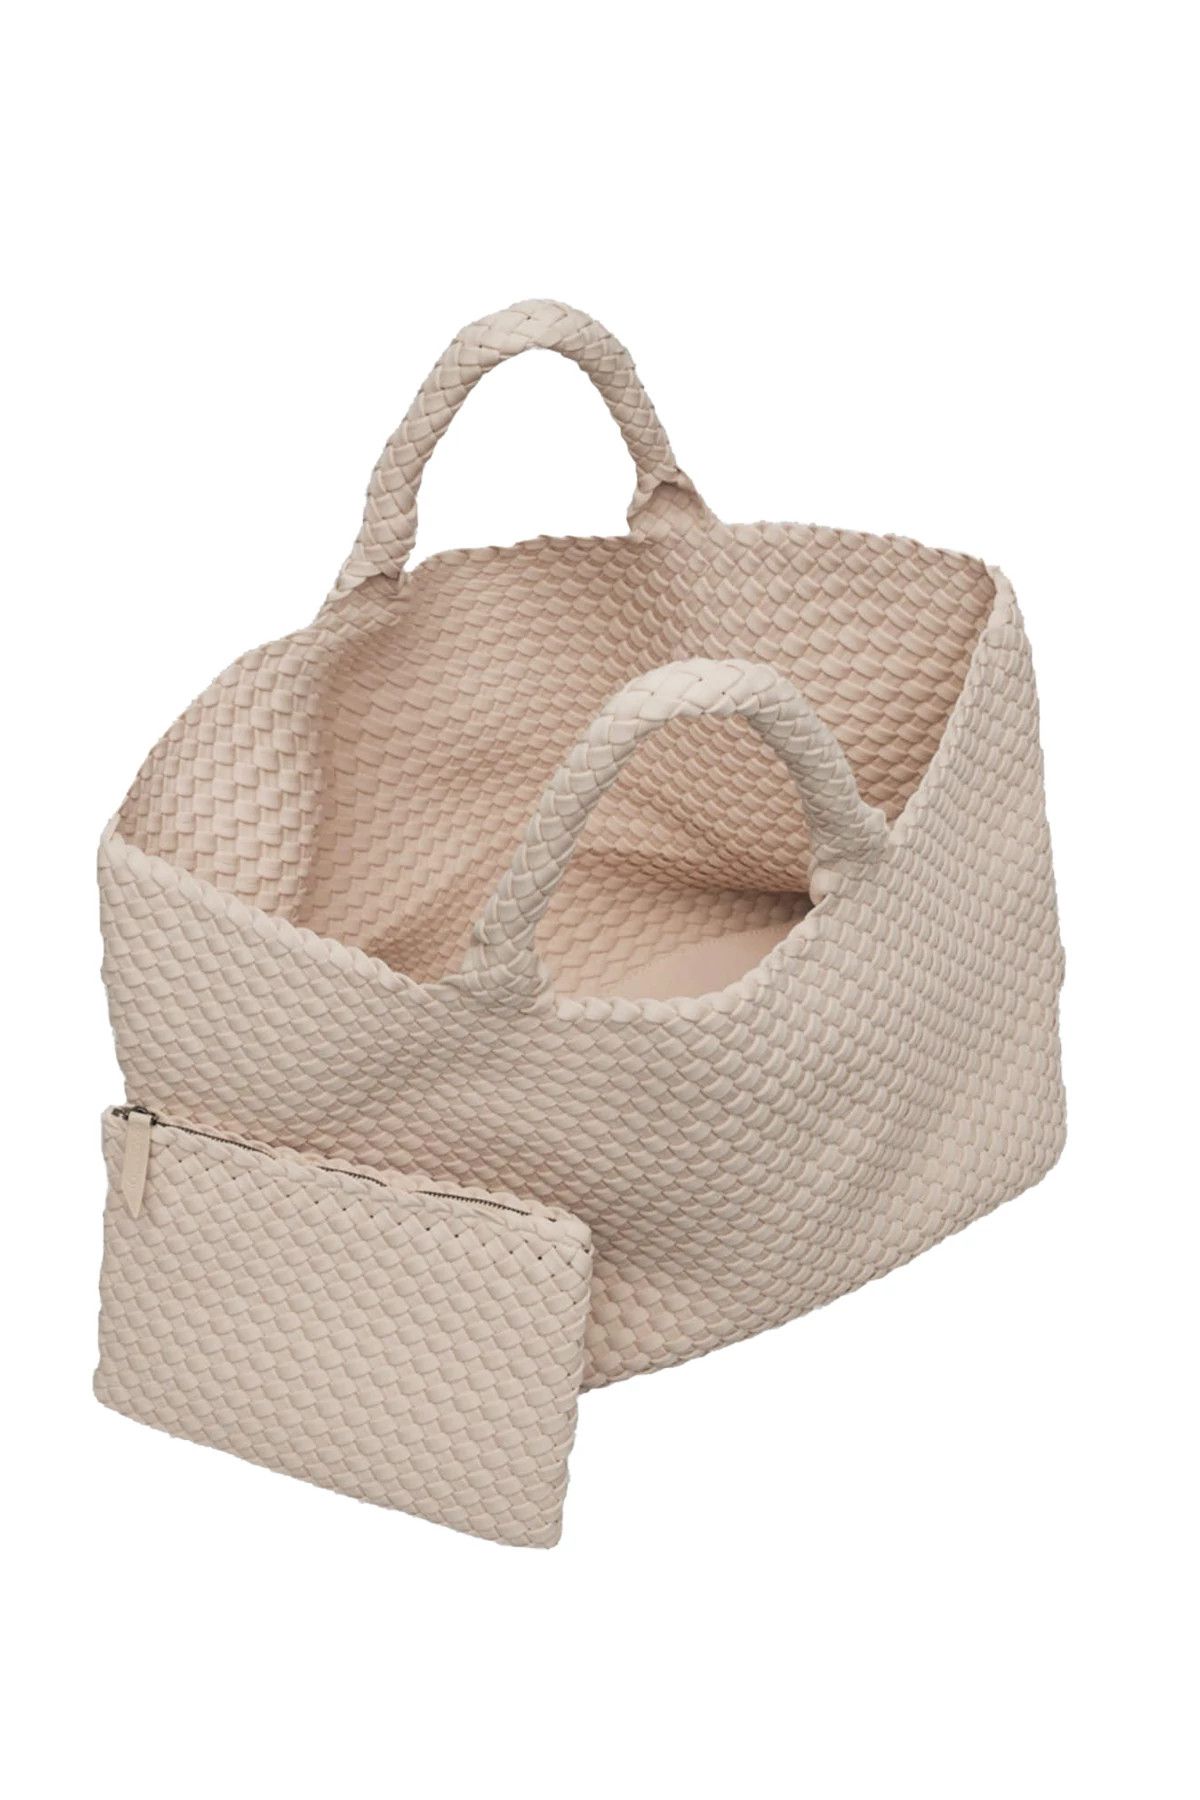 St. Barths Large Tote | Everything But Water